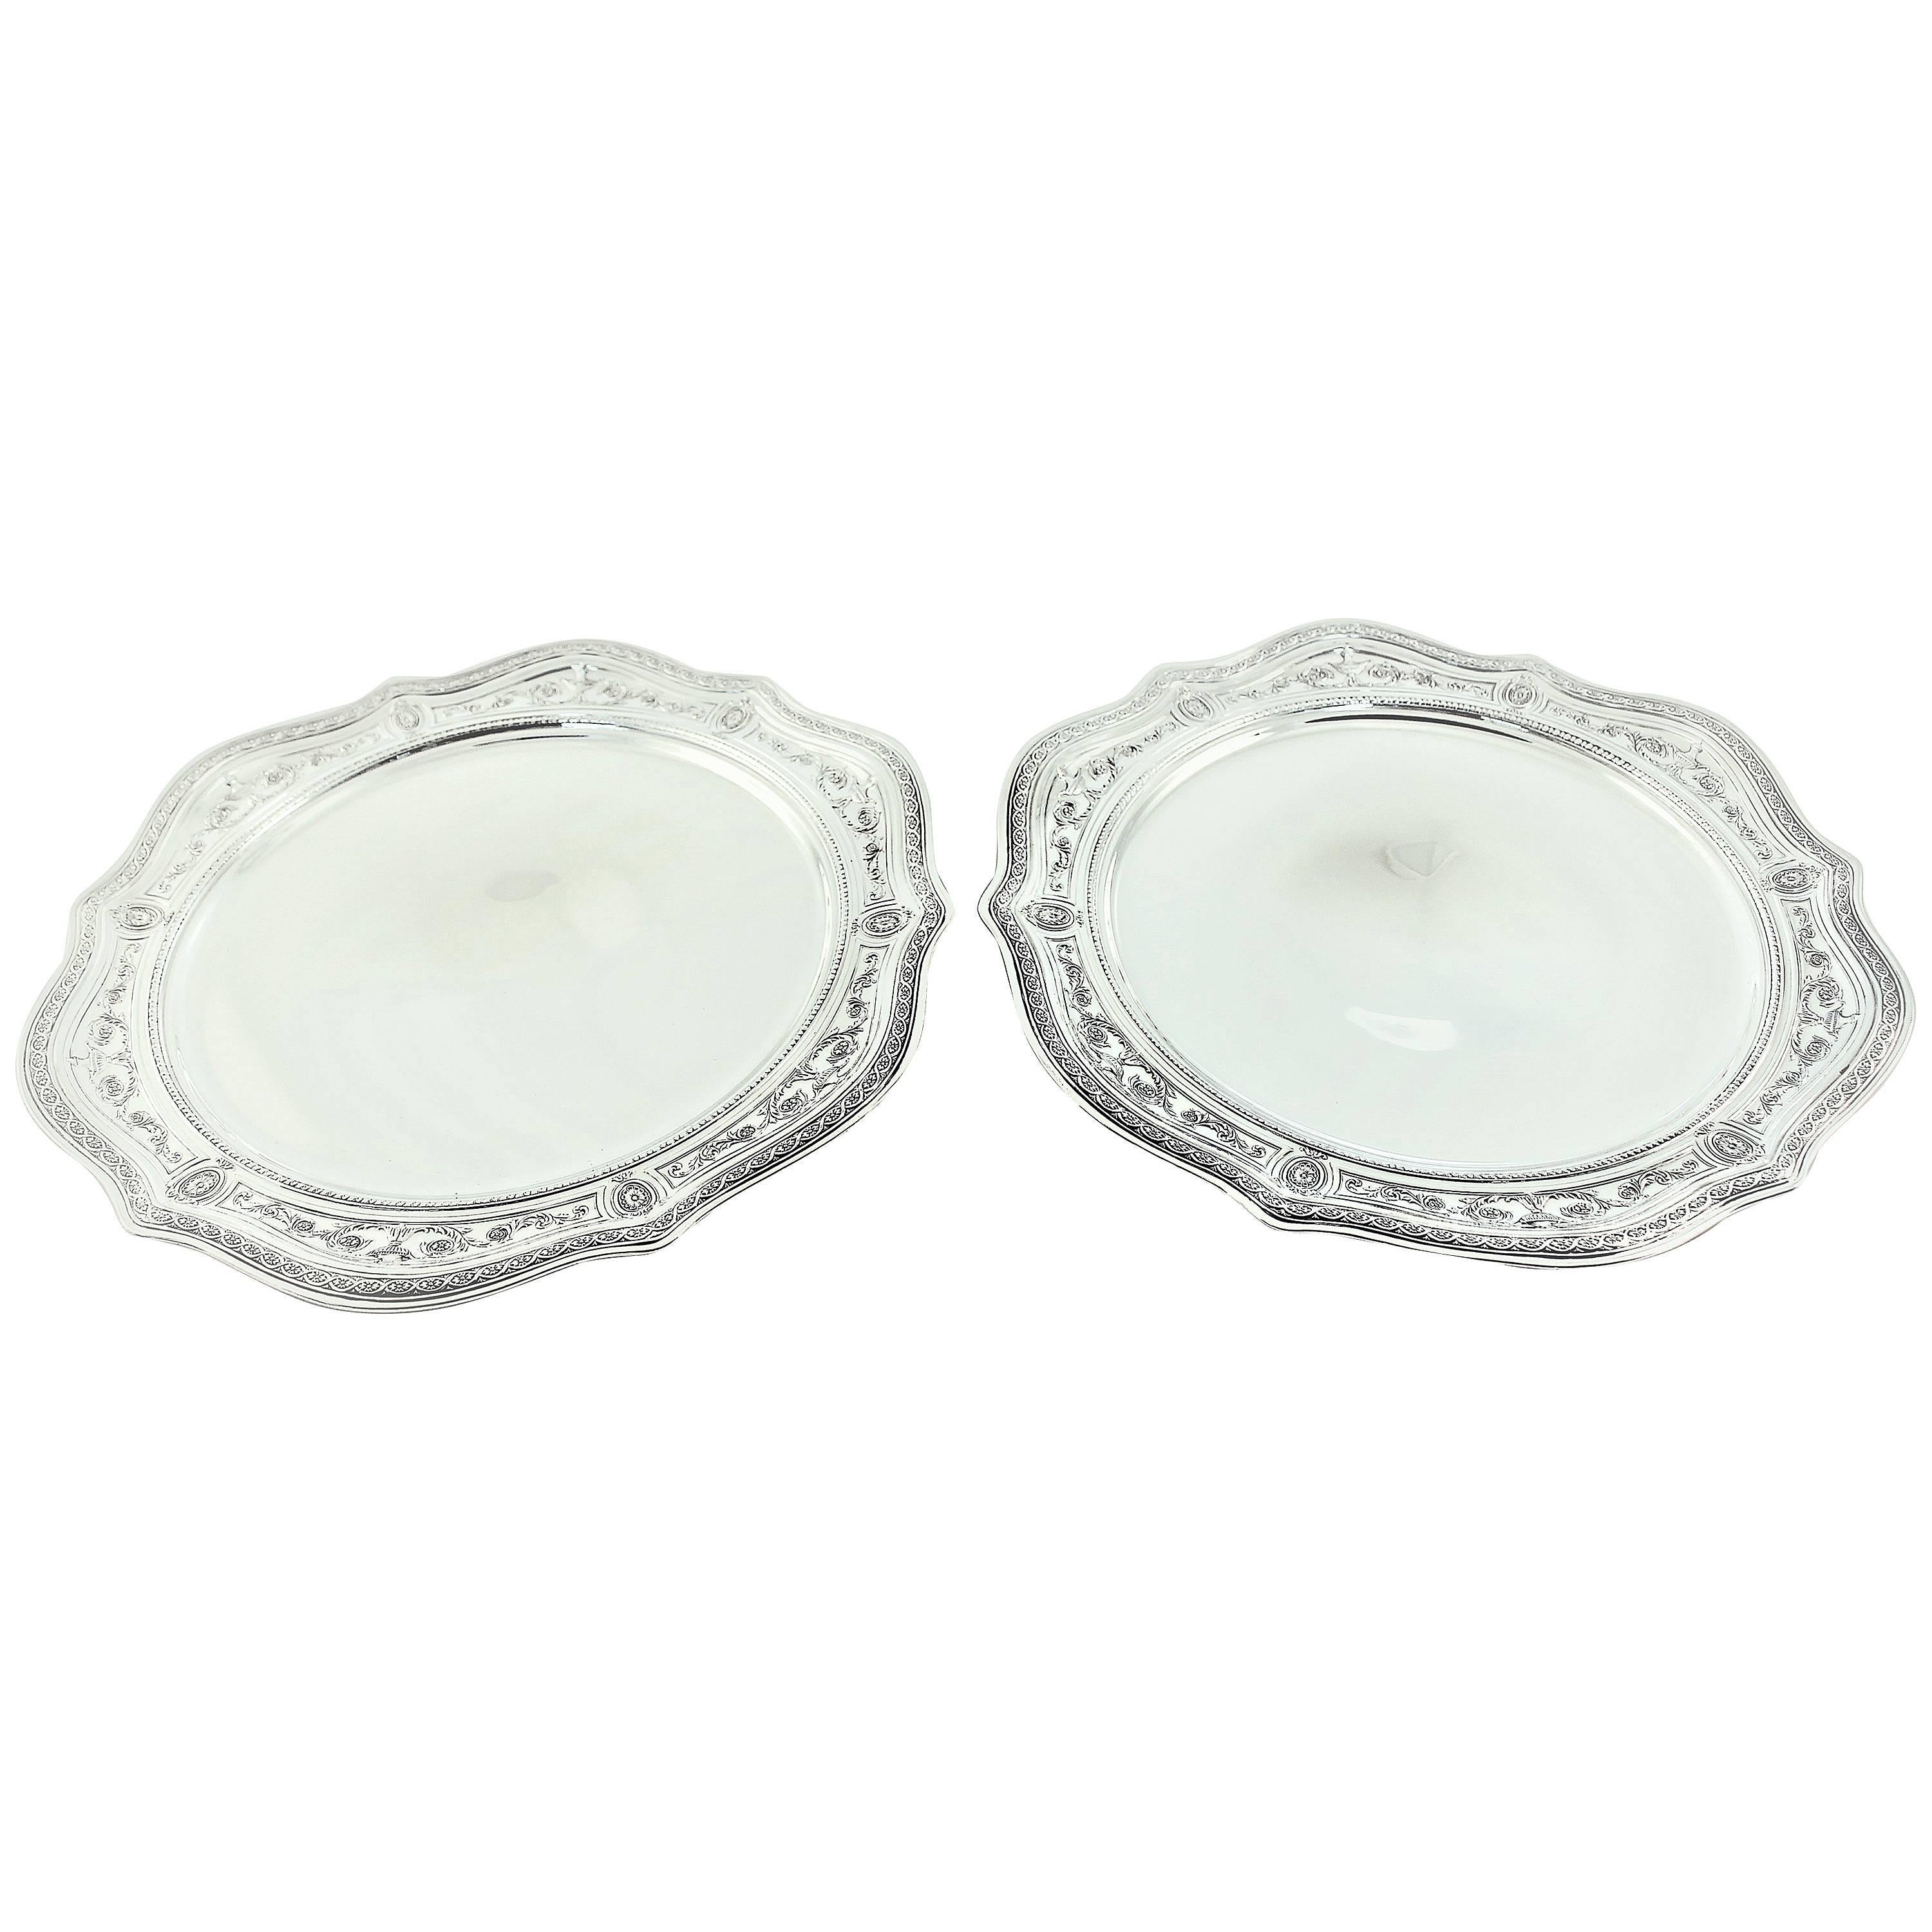 Pair of Dishes on Pedestals